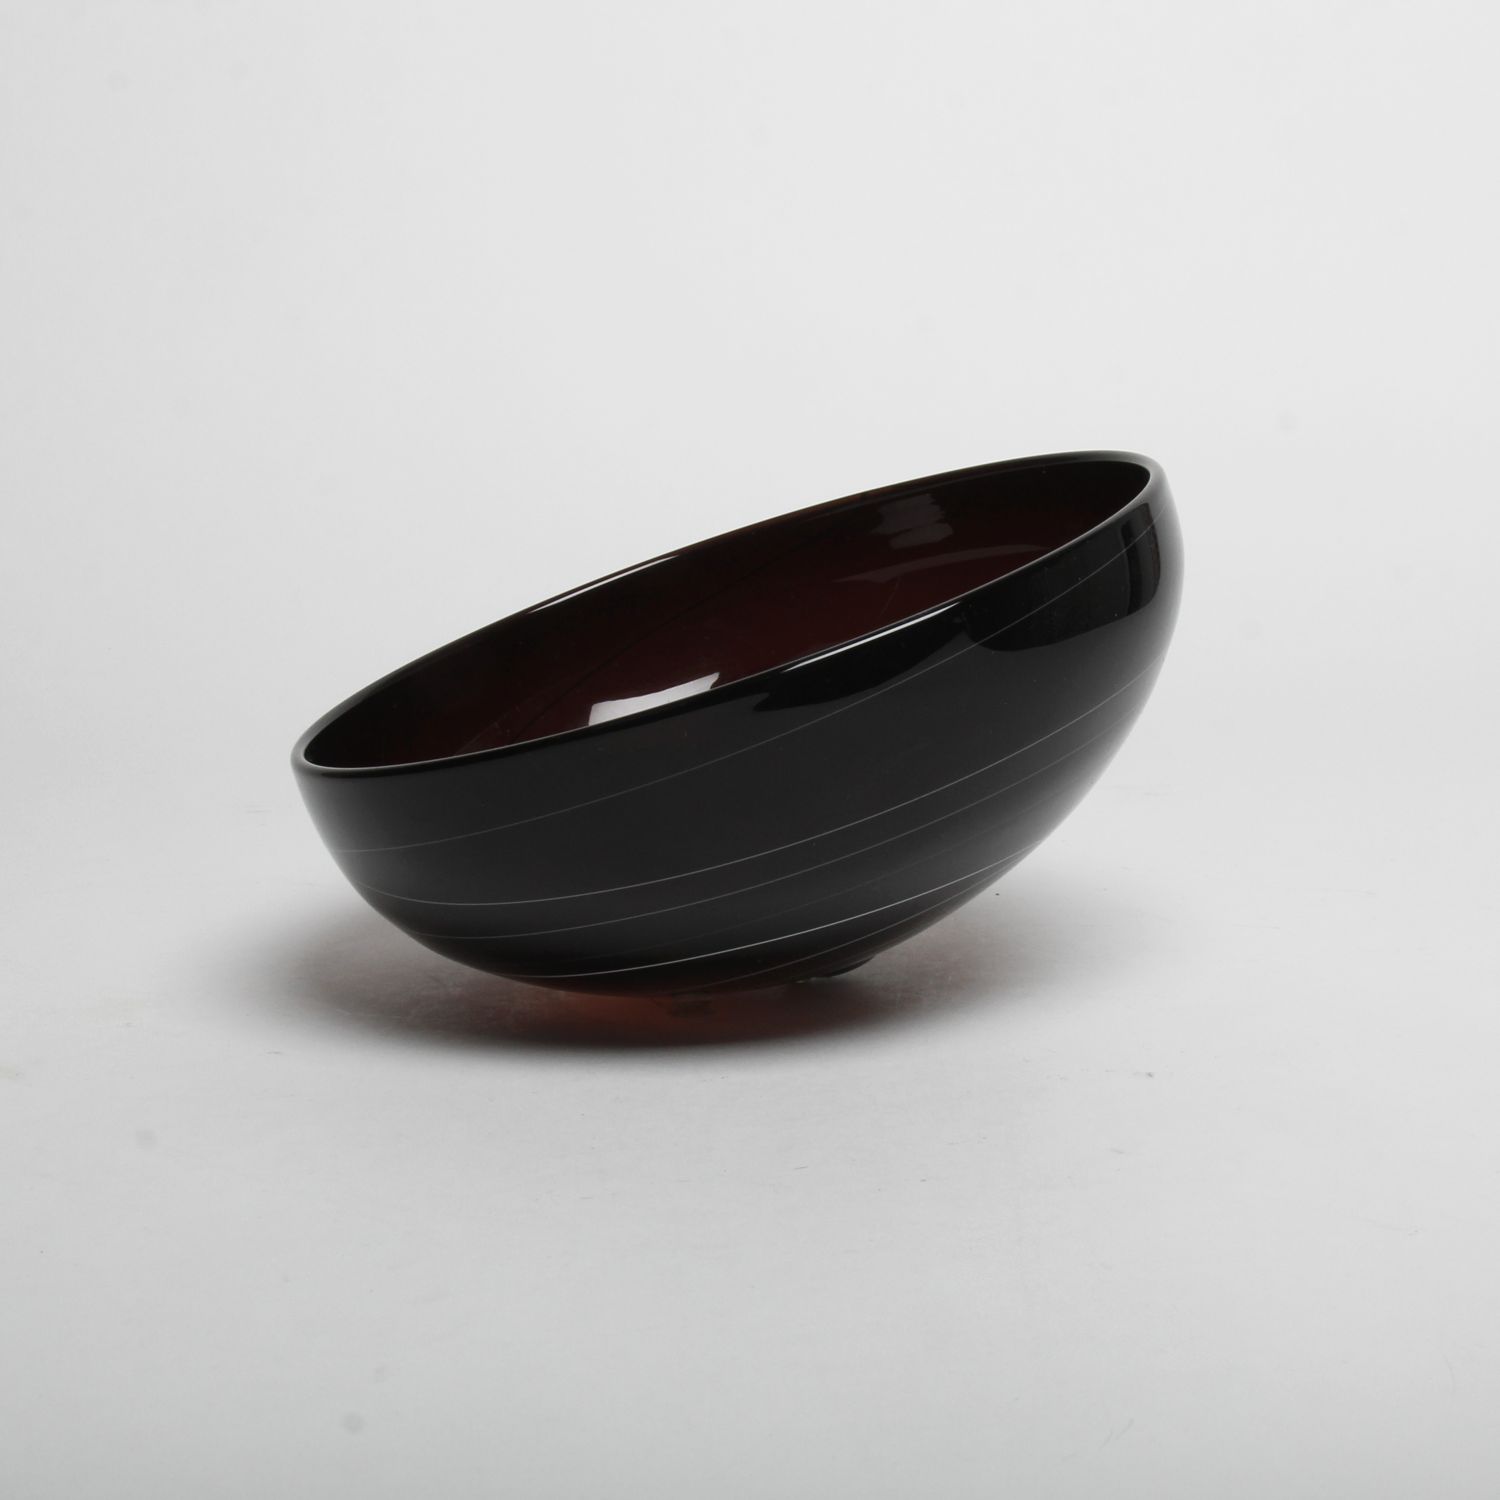 Eidos Glass Designs: Bowl (Each sold separately) Product Image 2 of 5